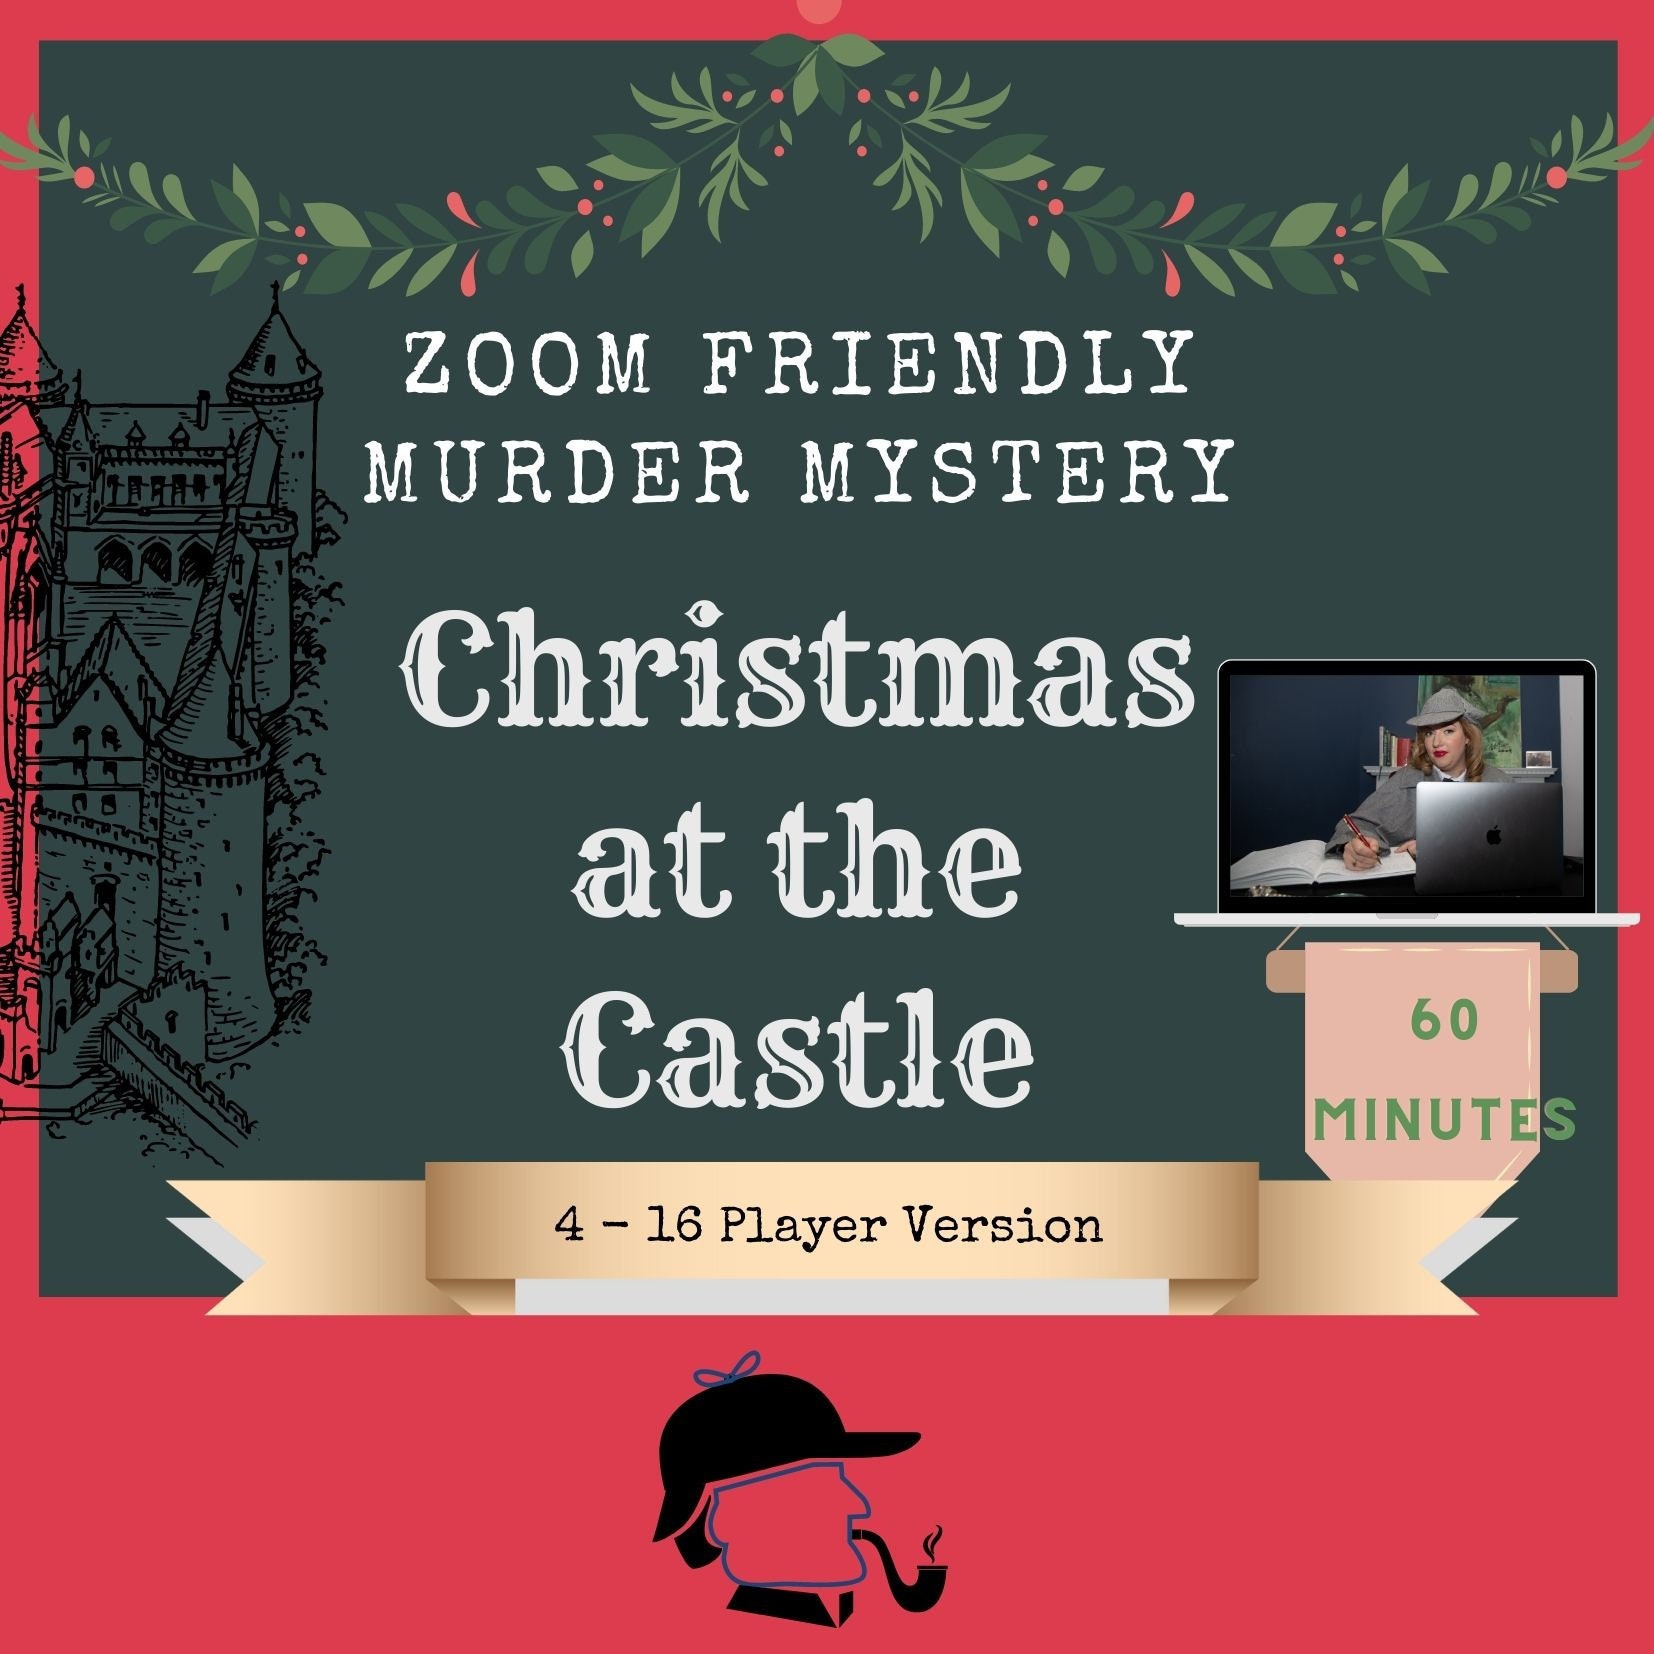 Christmas Murder Mystery Castle Game 4 16 Player// Printable image image